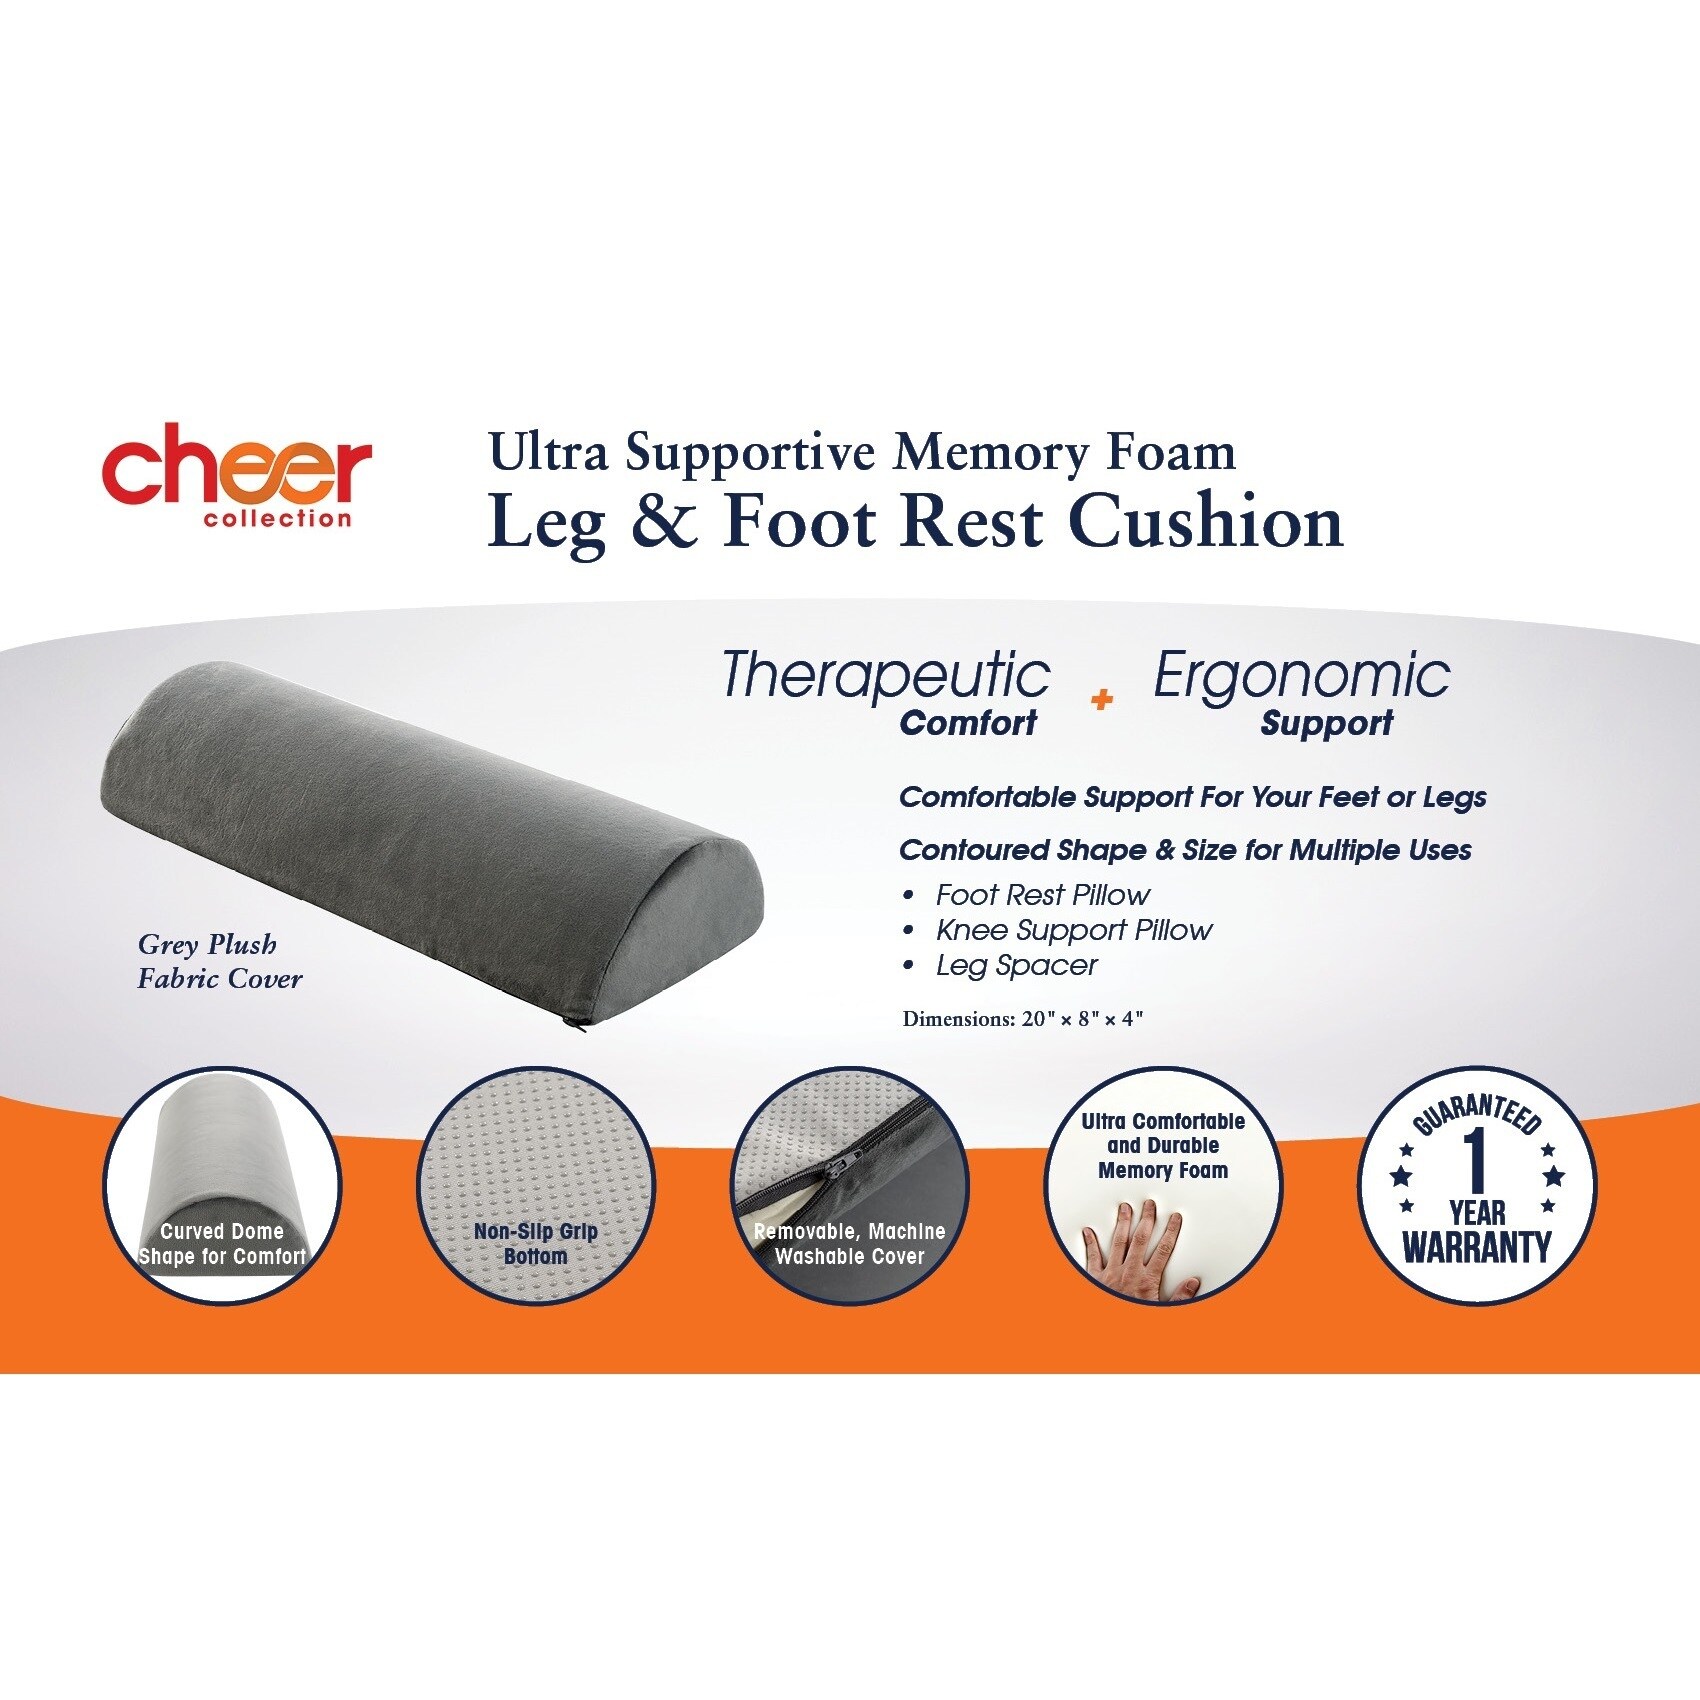 https://ak1.ostkcdn.com/images/products/19210811/Cheer-Collection-Memory-Foam-Leg-and-Foot-Rest-Cushion-d154e1a0-0fe7-406c-8e15-be98fc3aeacc.jpg